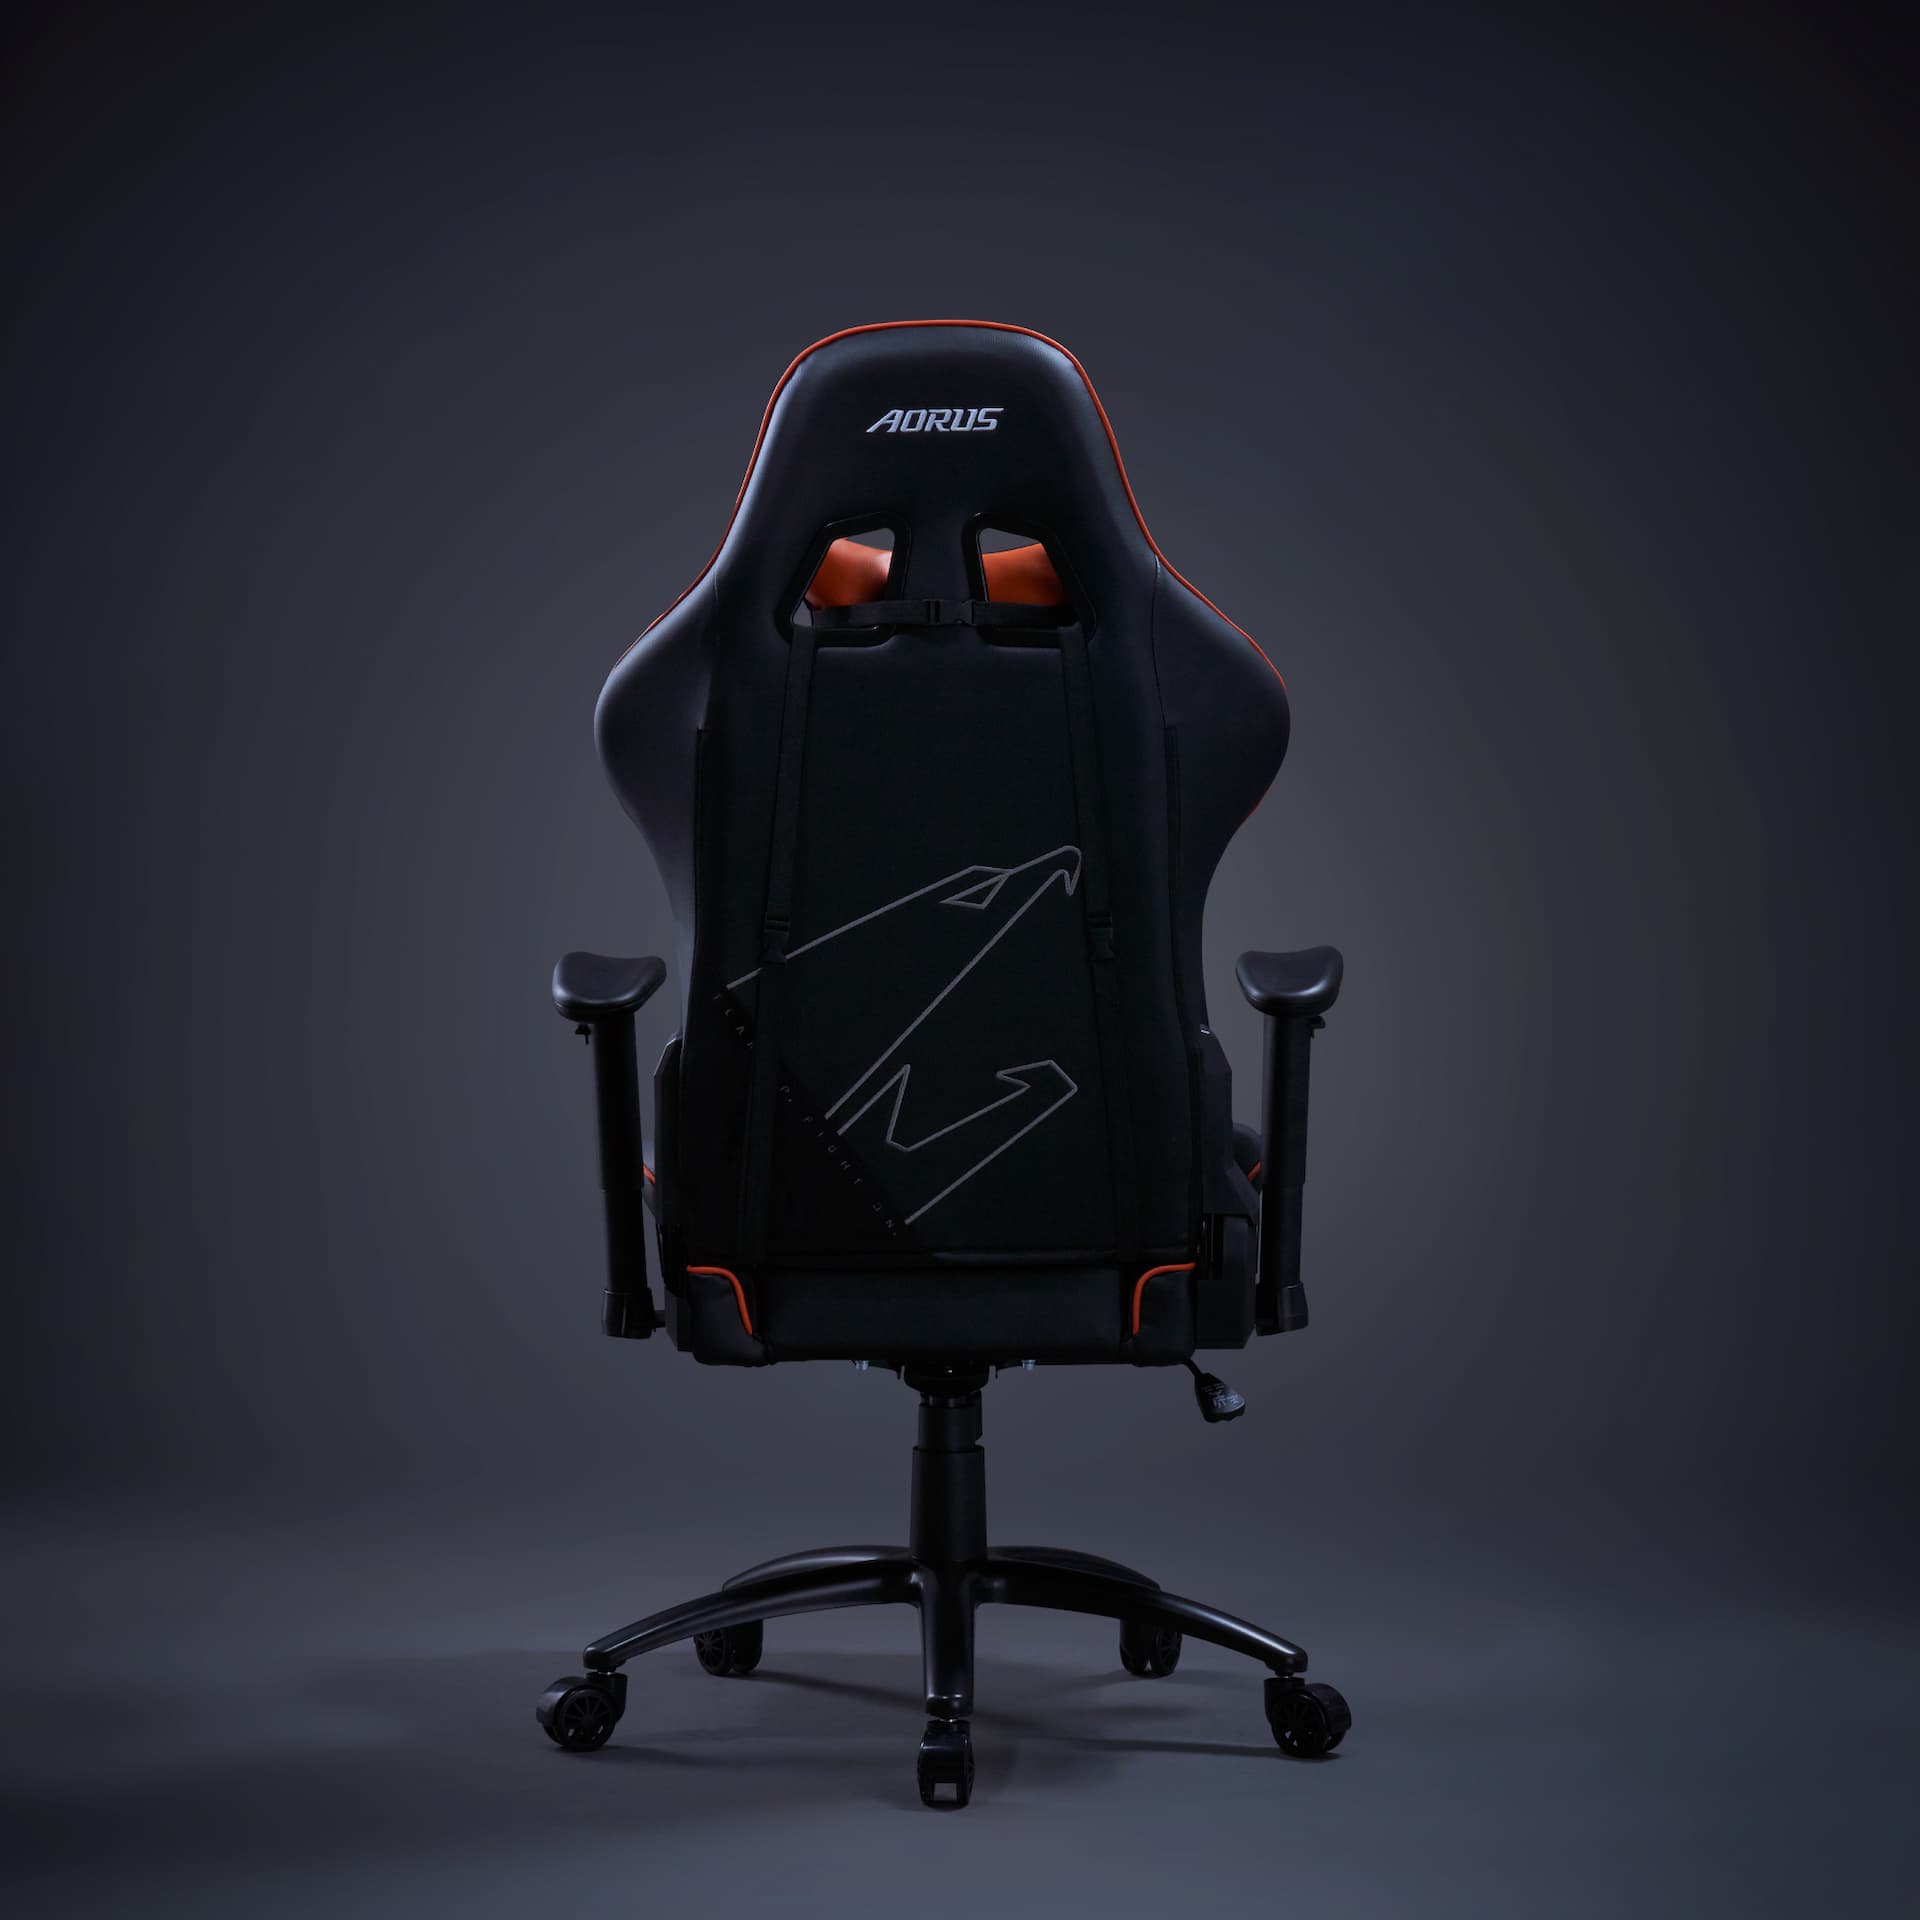 Gaming chair guide: Expert shares how to buy a gaming chair